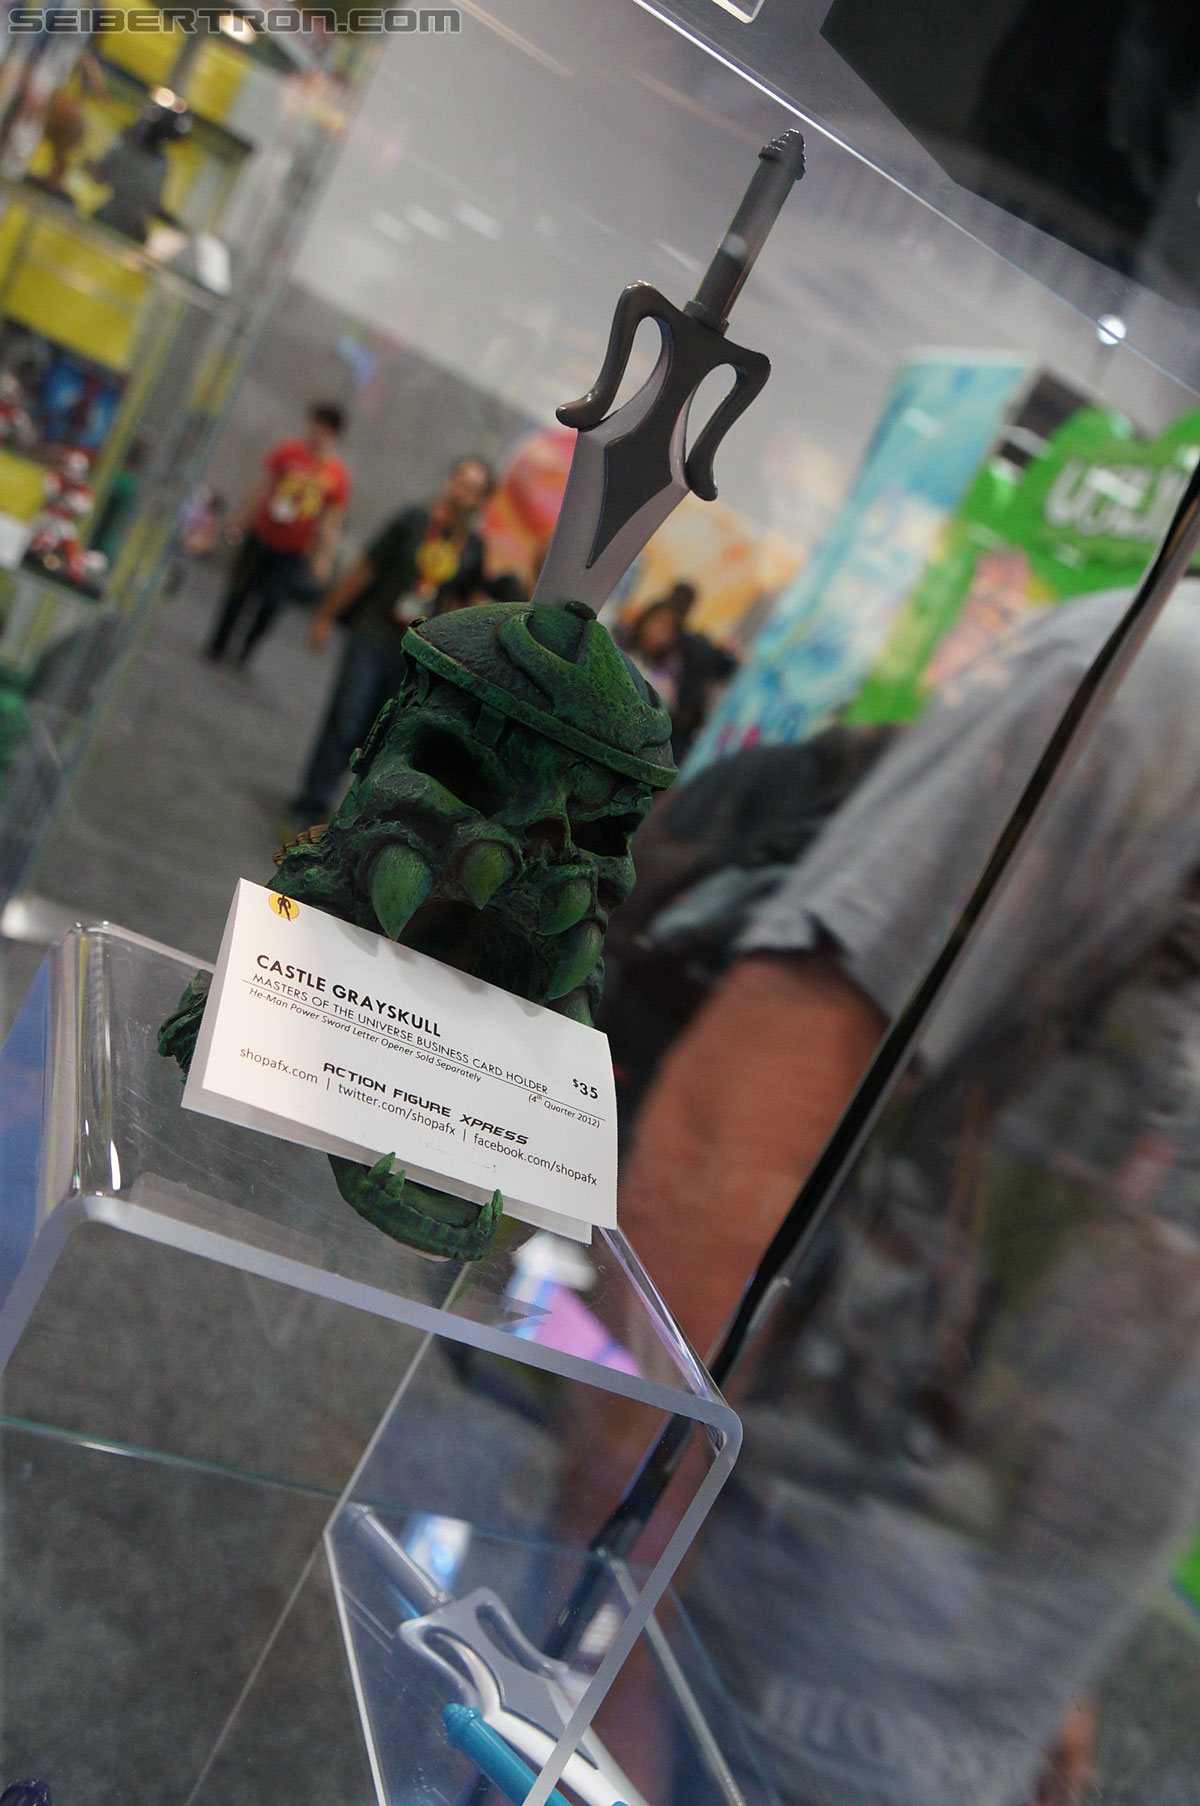 SDCC 2012 - Masters of the Universe Classics from Mattel